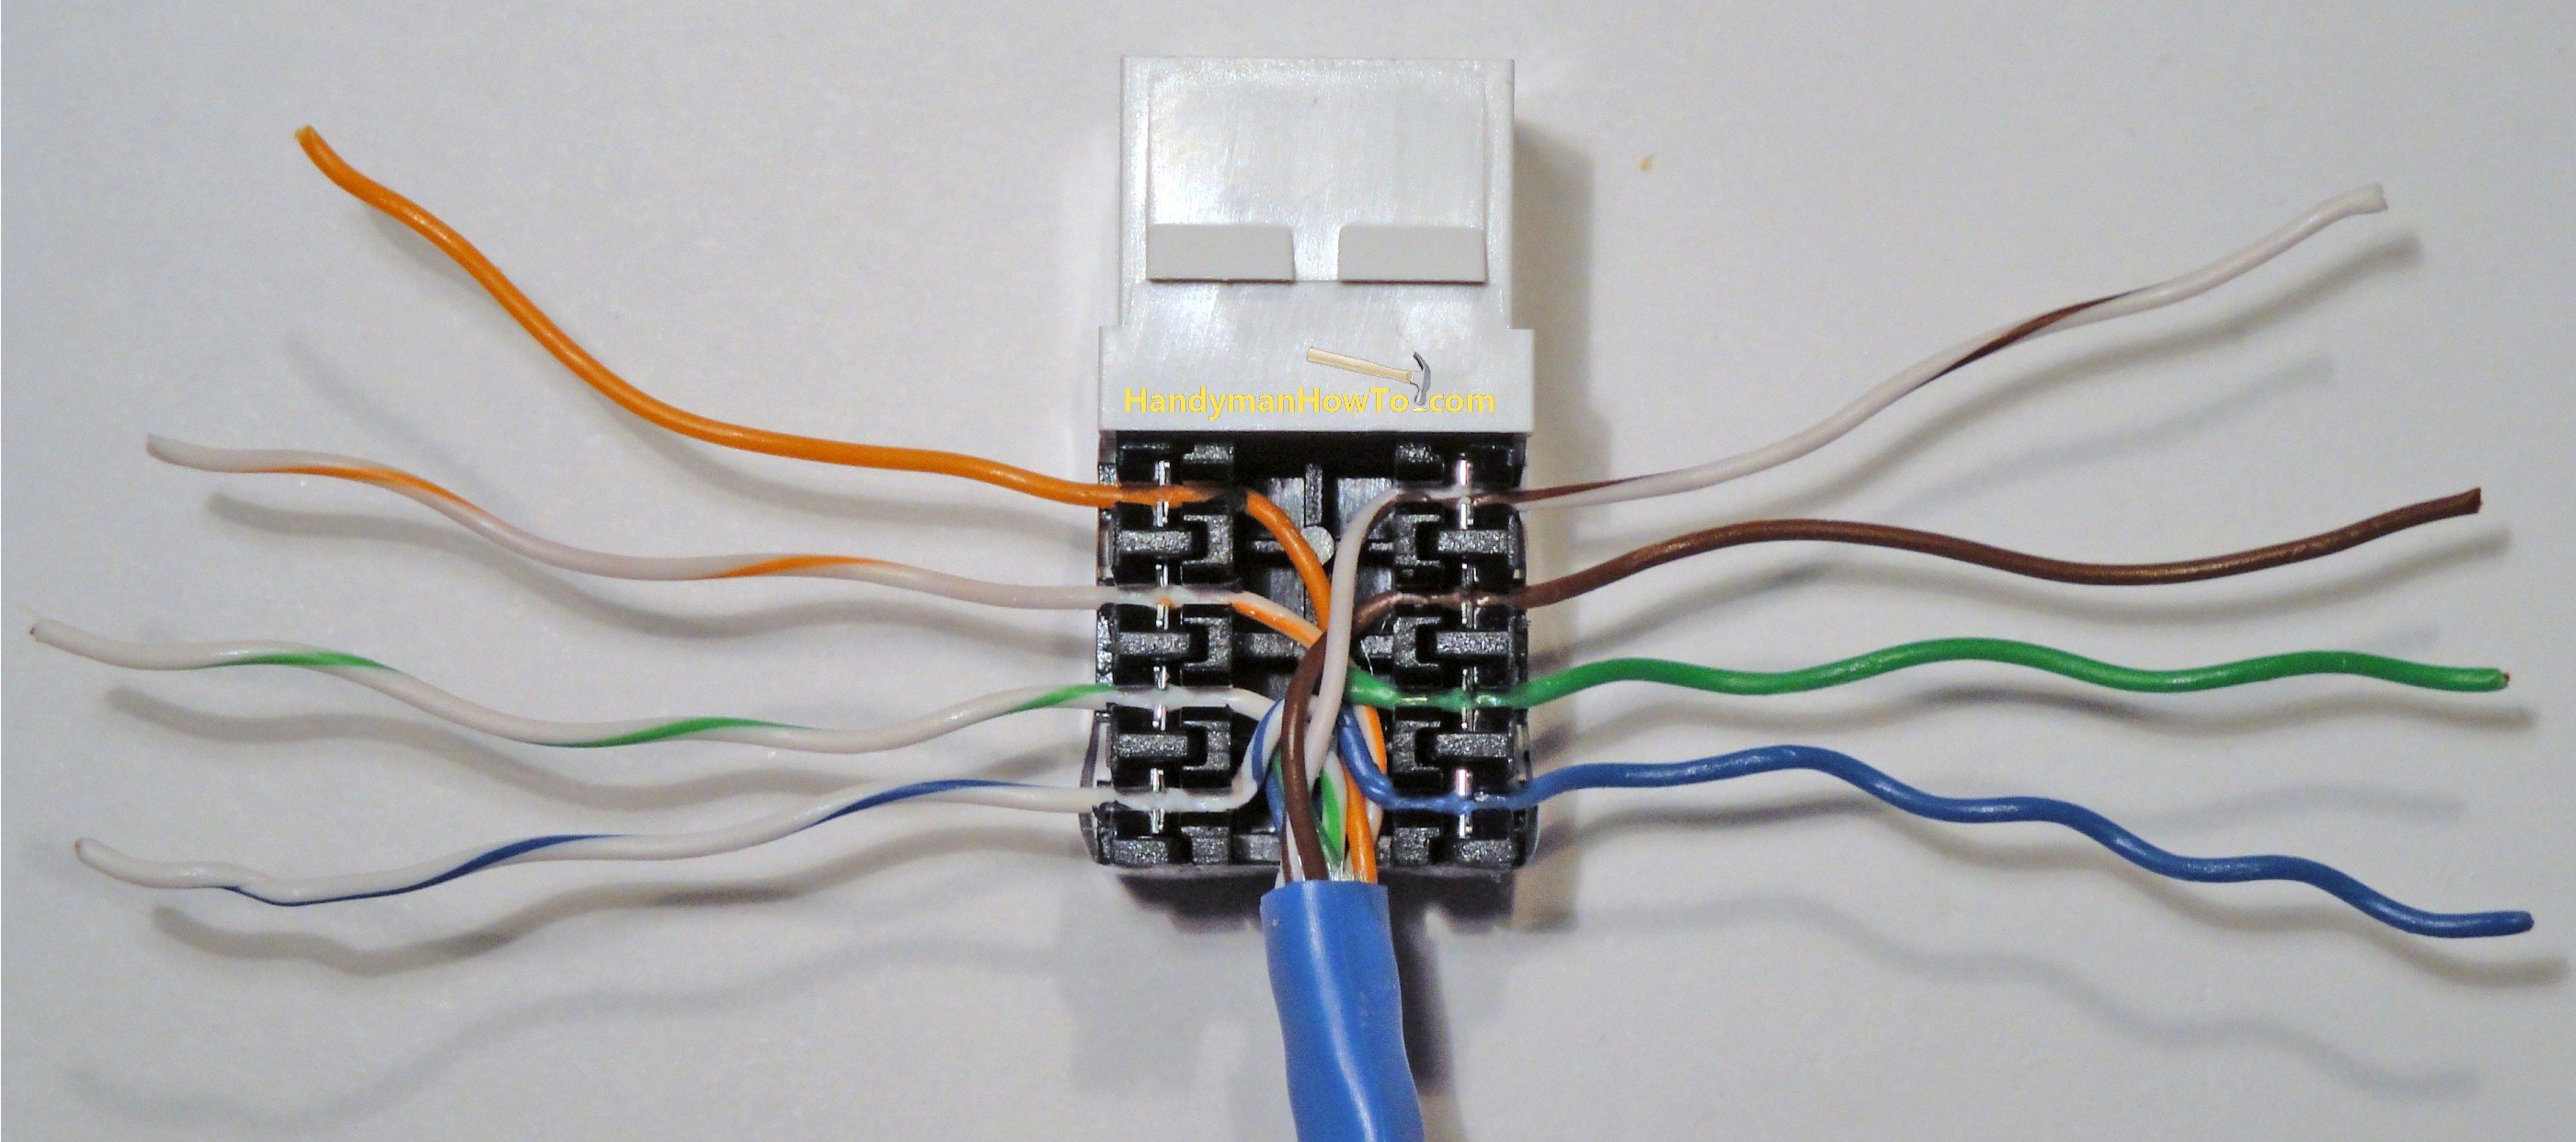 How to Install an Ethernet Jack for a Home Network